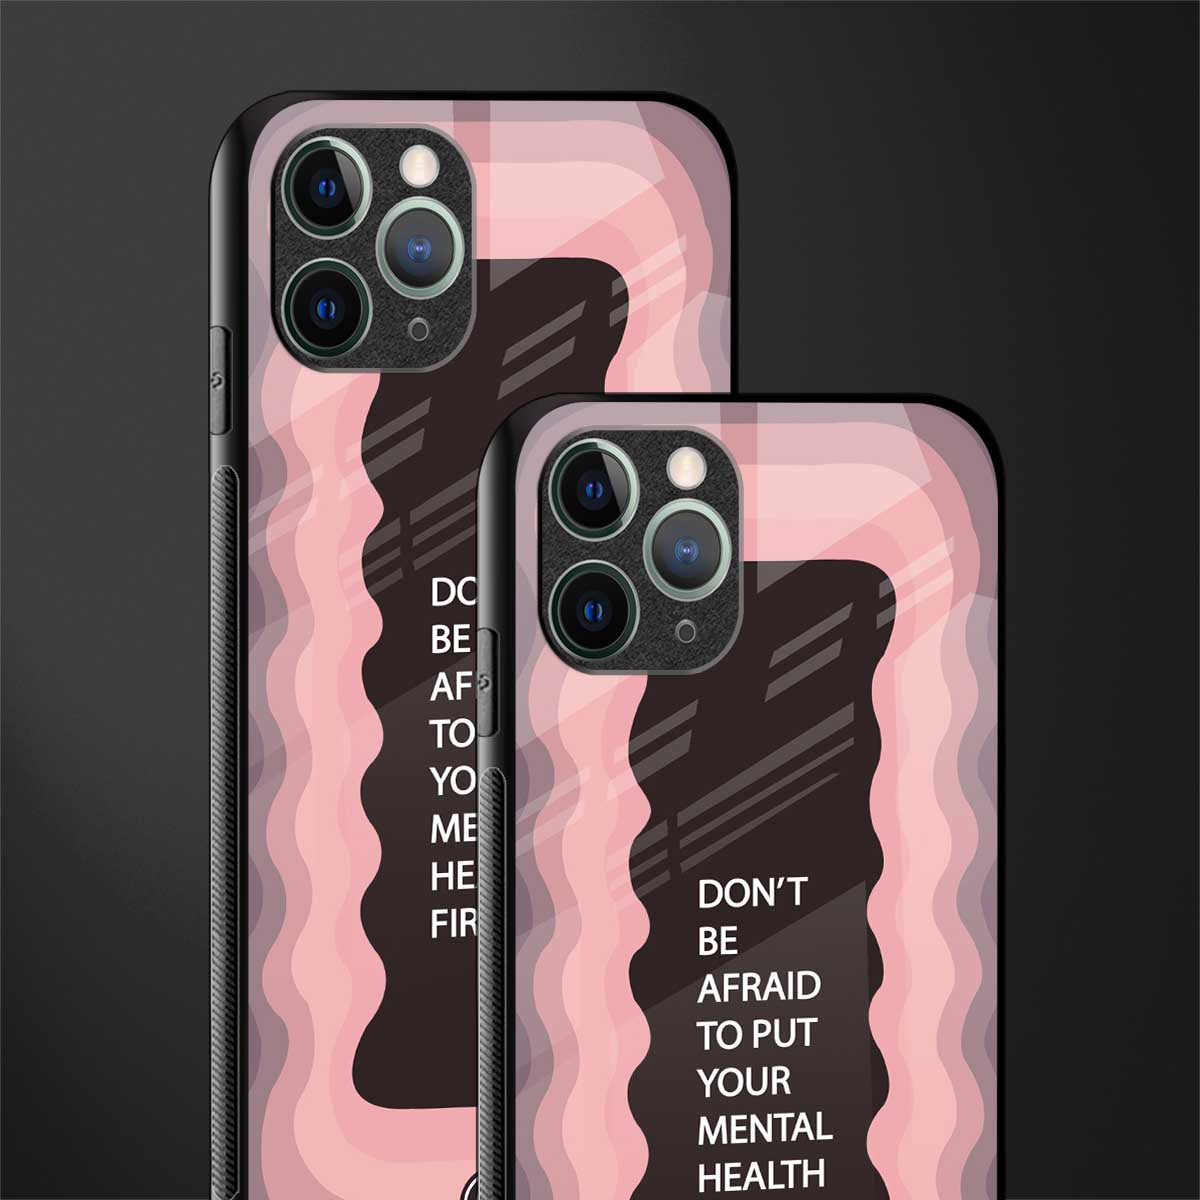 mental health first glass case for iphone 11 pro max